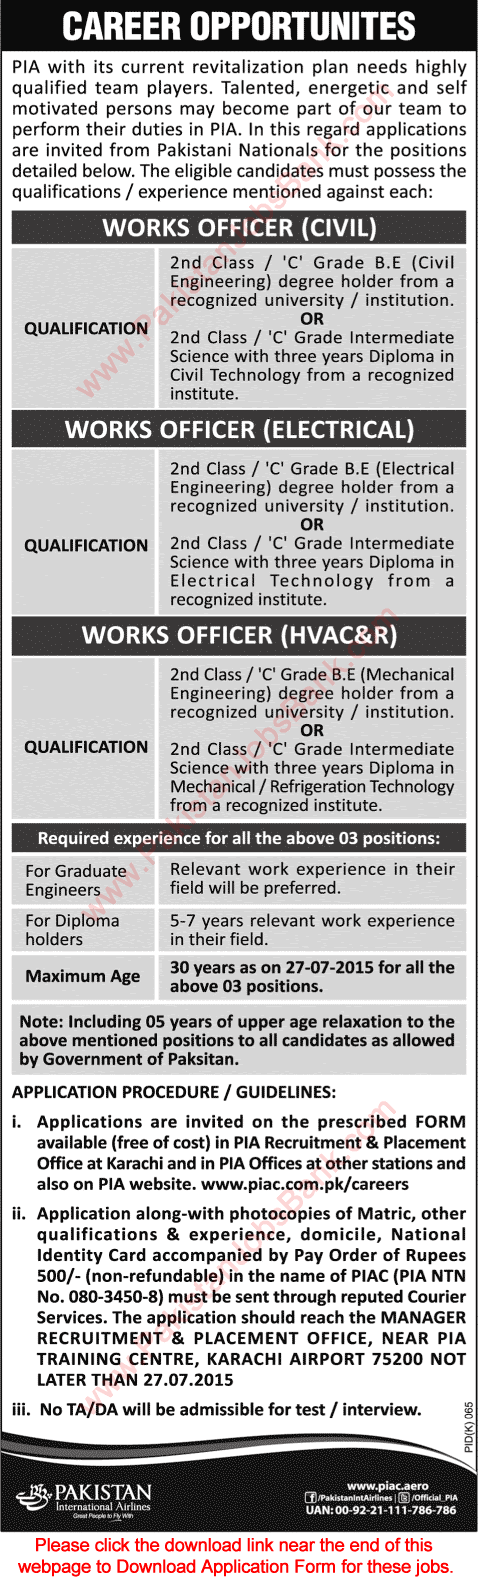 PIA Jobs July 2015 Application Form Civil / Electrical / Mechanical Engineers as Work Officers Latest